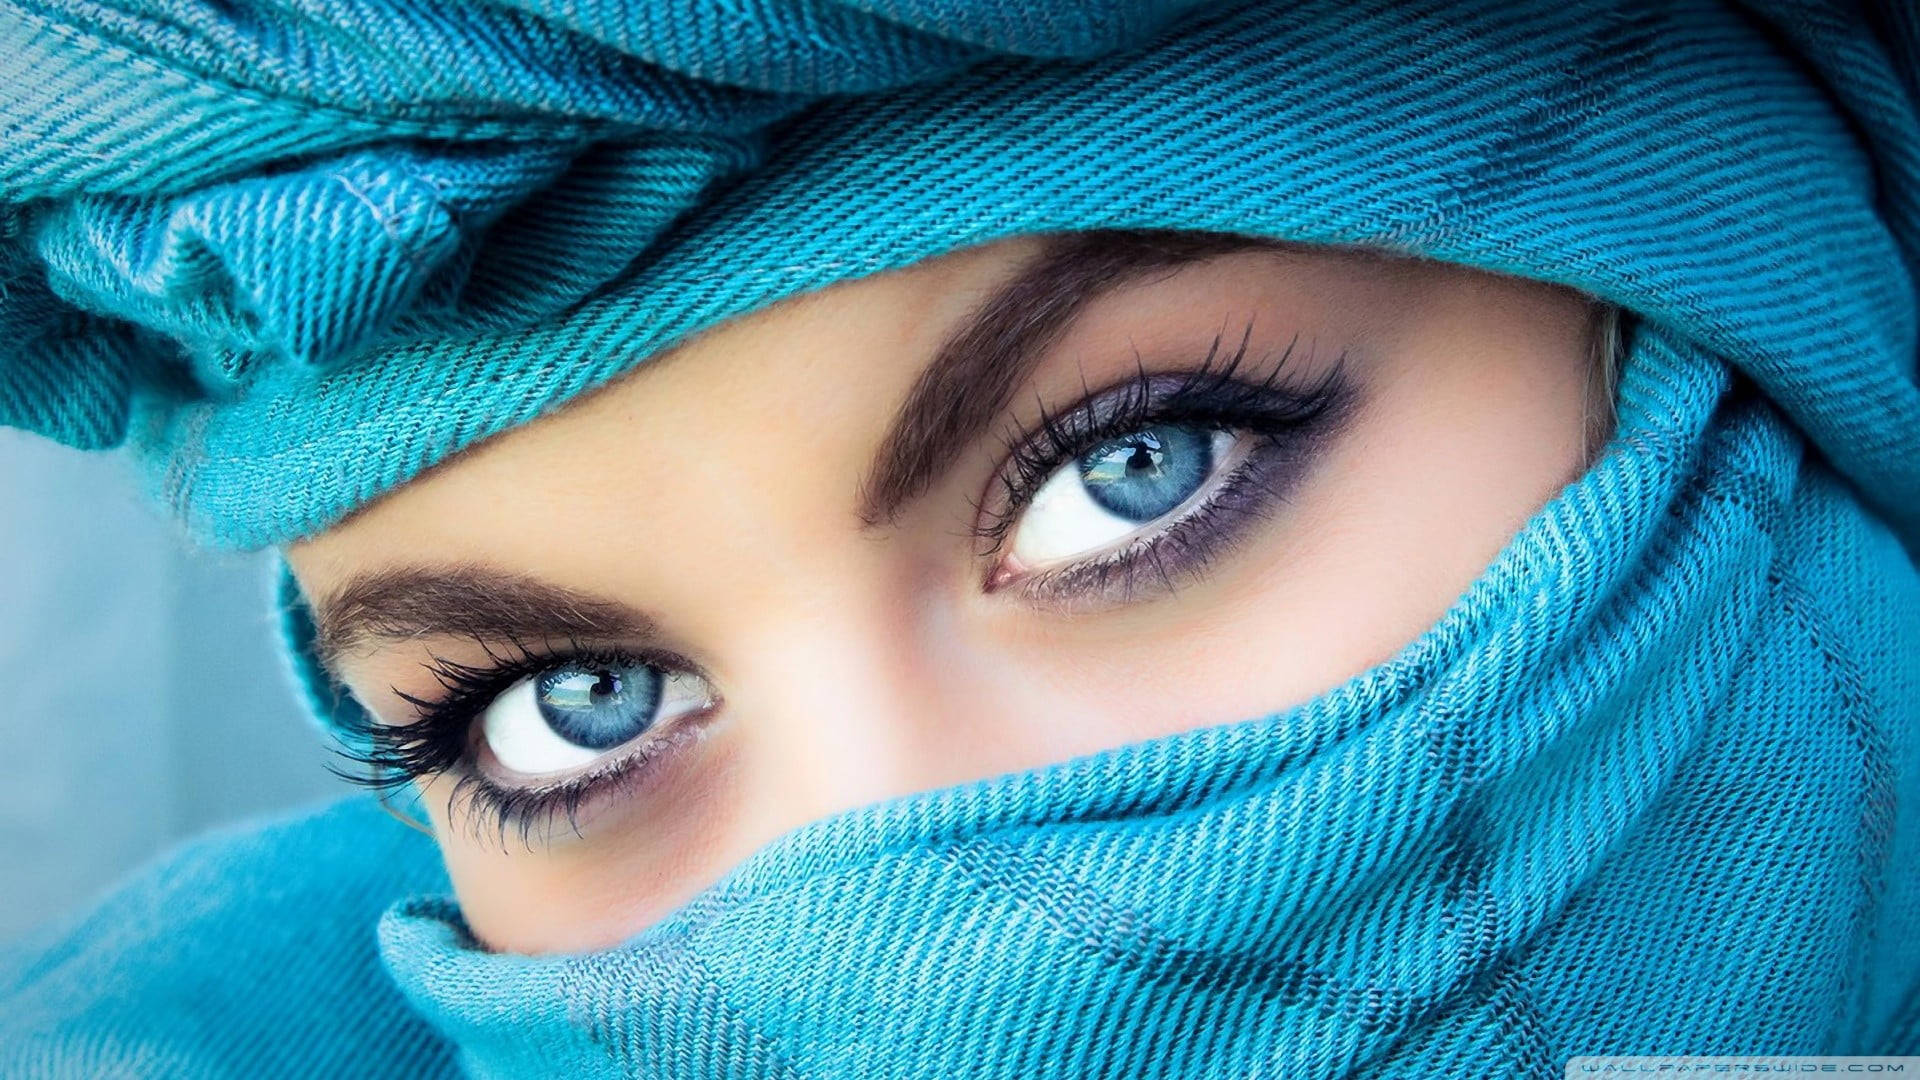 Enigmatic Woman with Cloth Covered Face Wallpaper